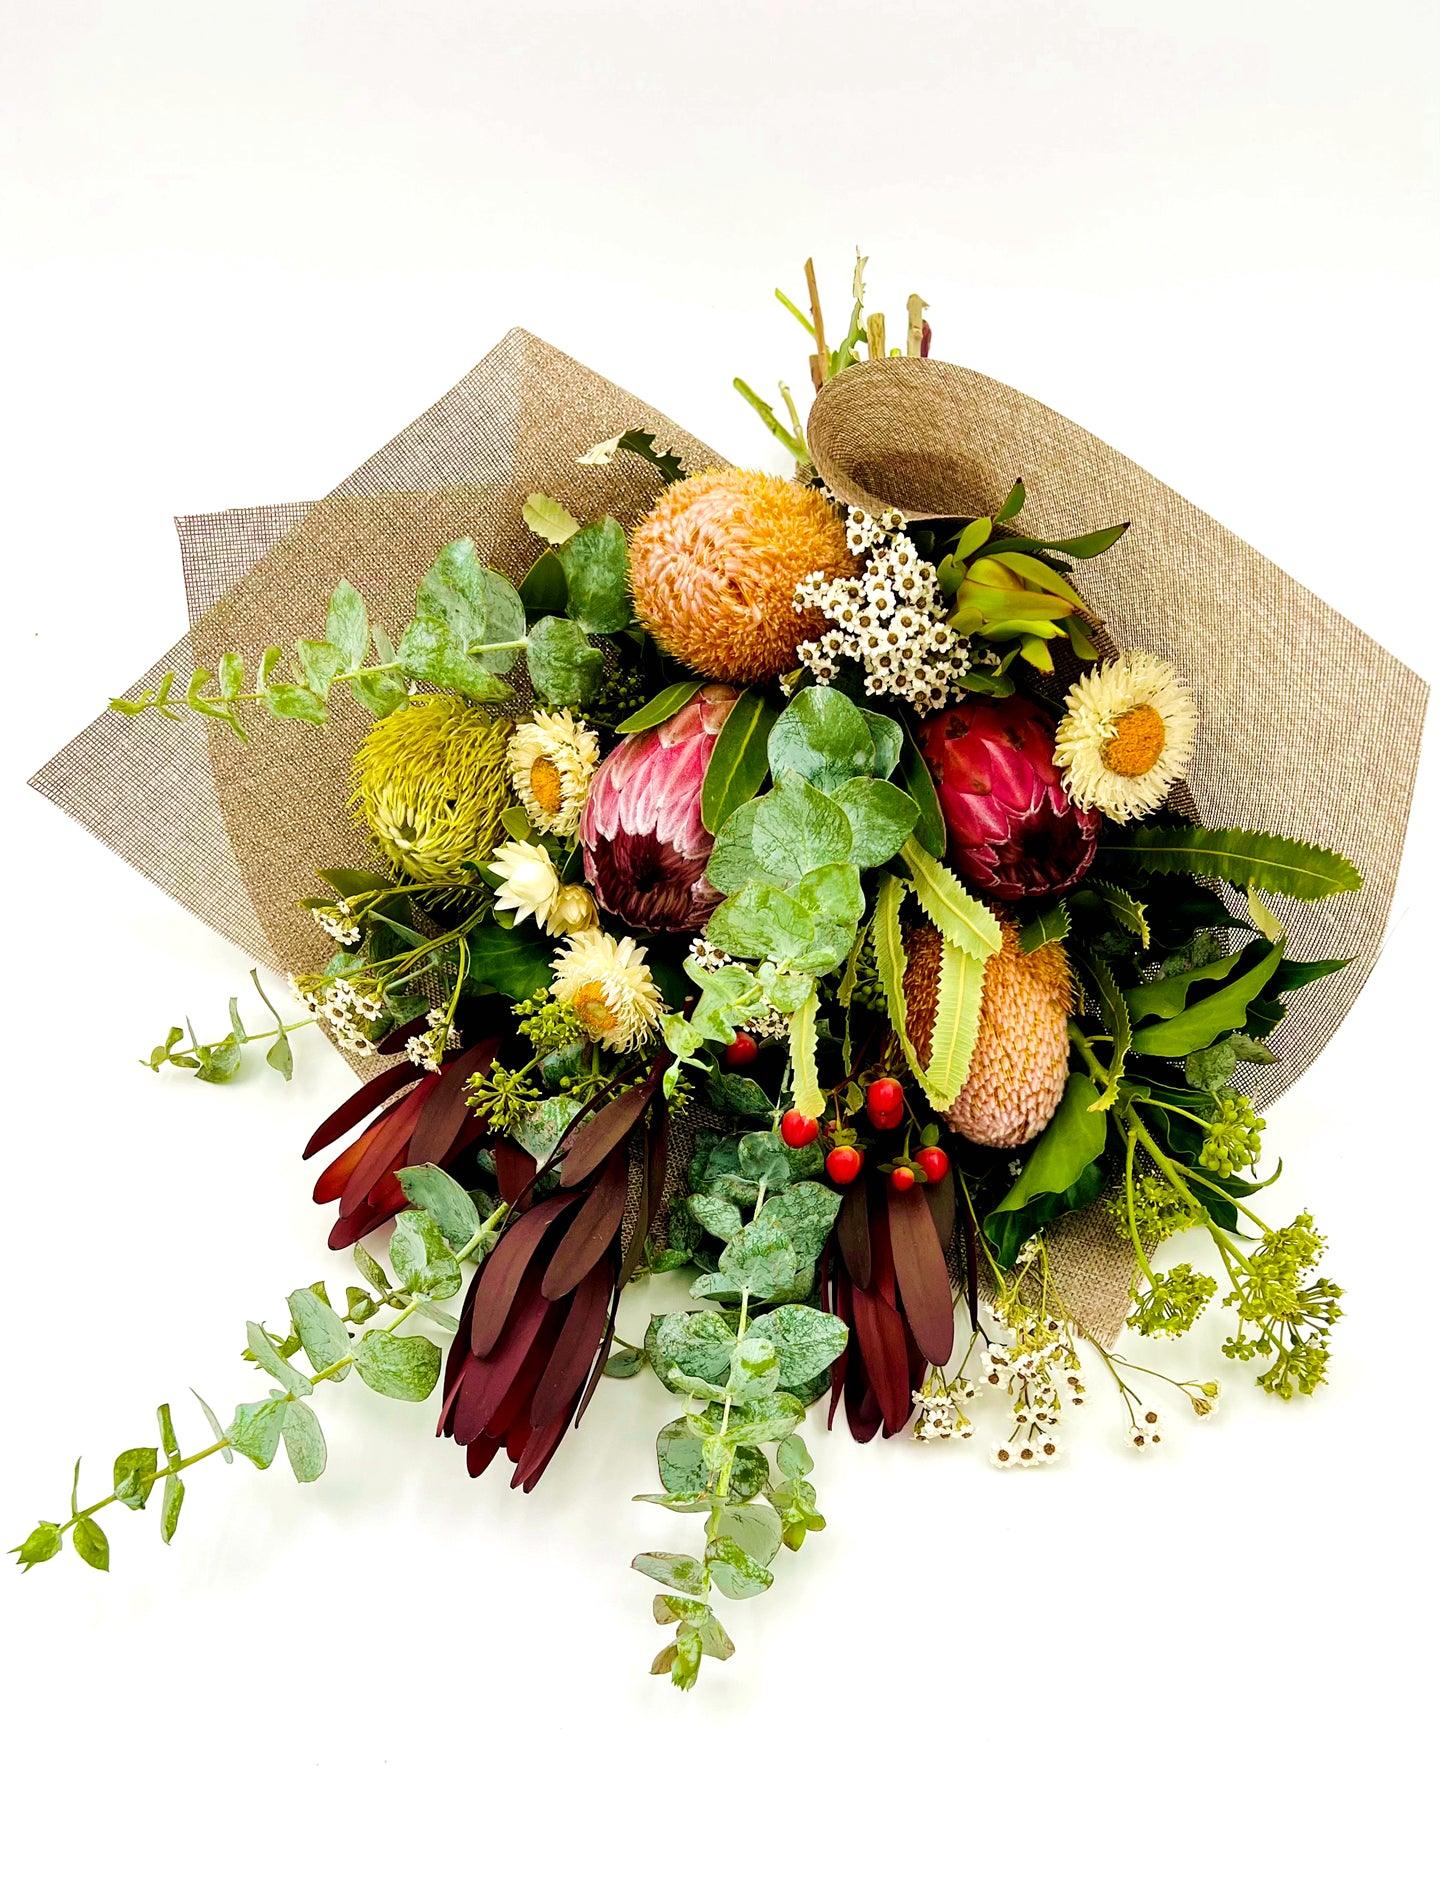 This large native flower bouquet is a true showstopper! With its vibrant colours and lush greenery, it's sure to make any recipient feel special.